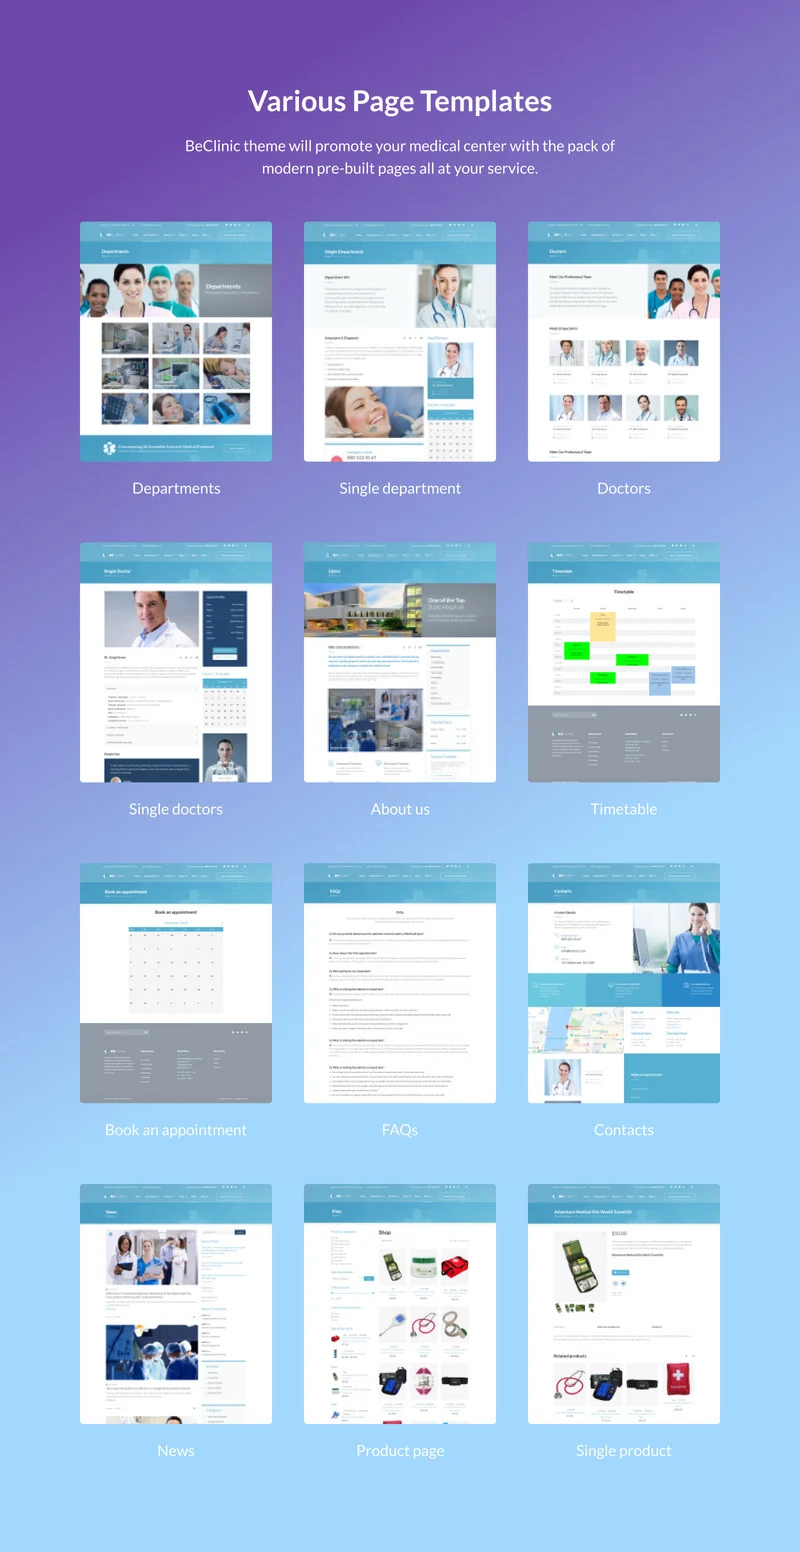 White lettering "Various Page Templates" and 12 templates on a gradient background.